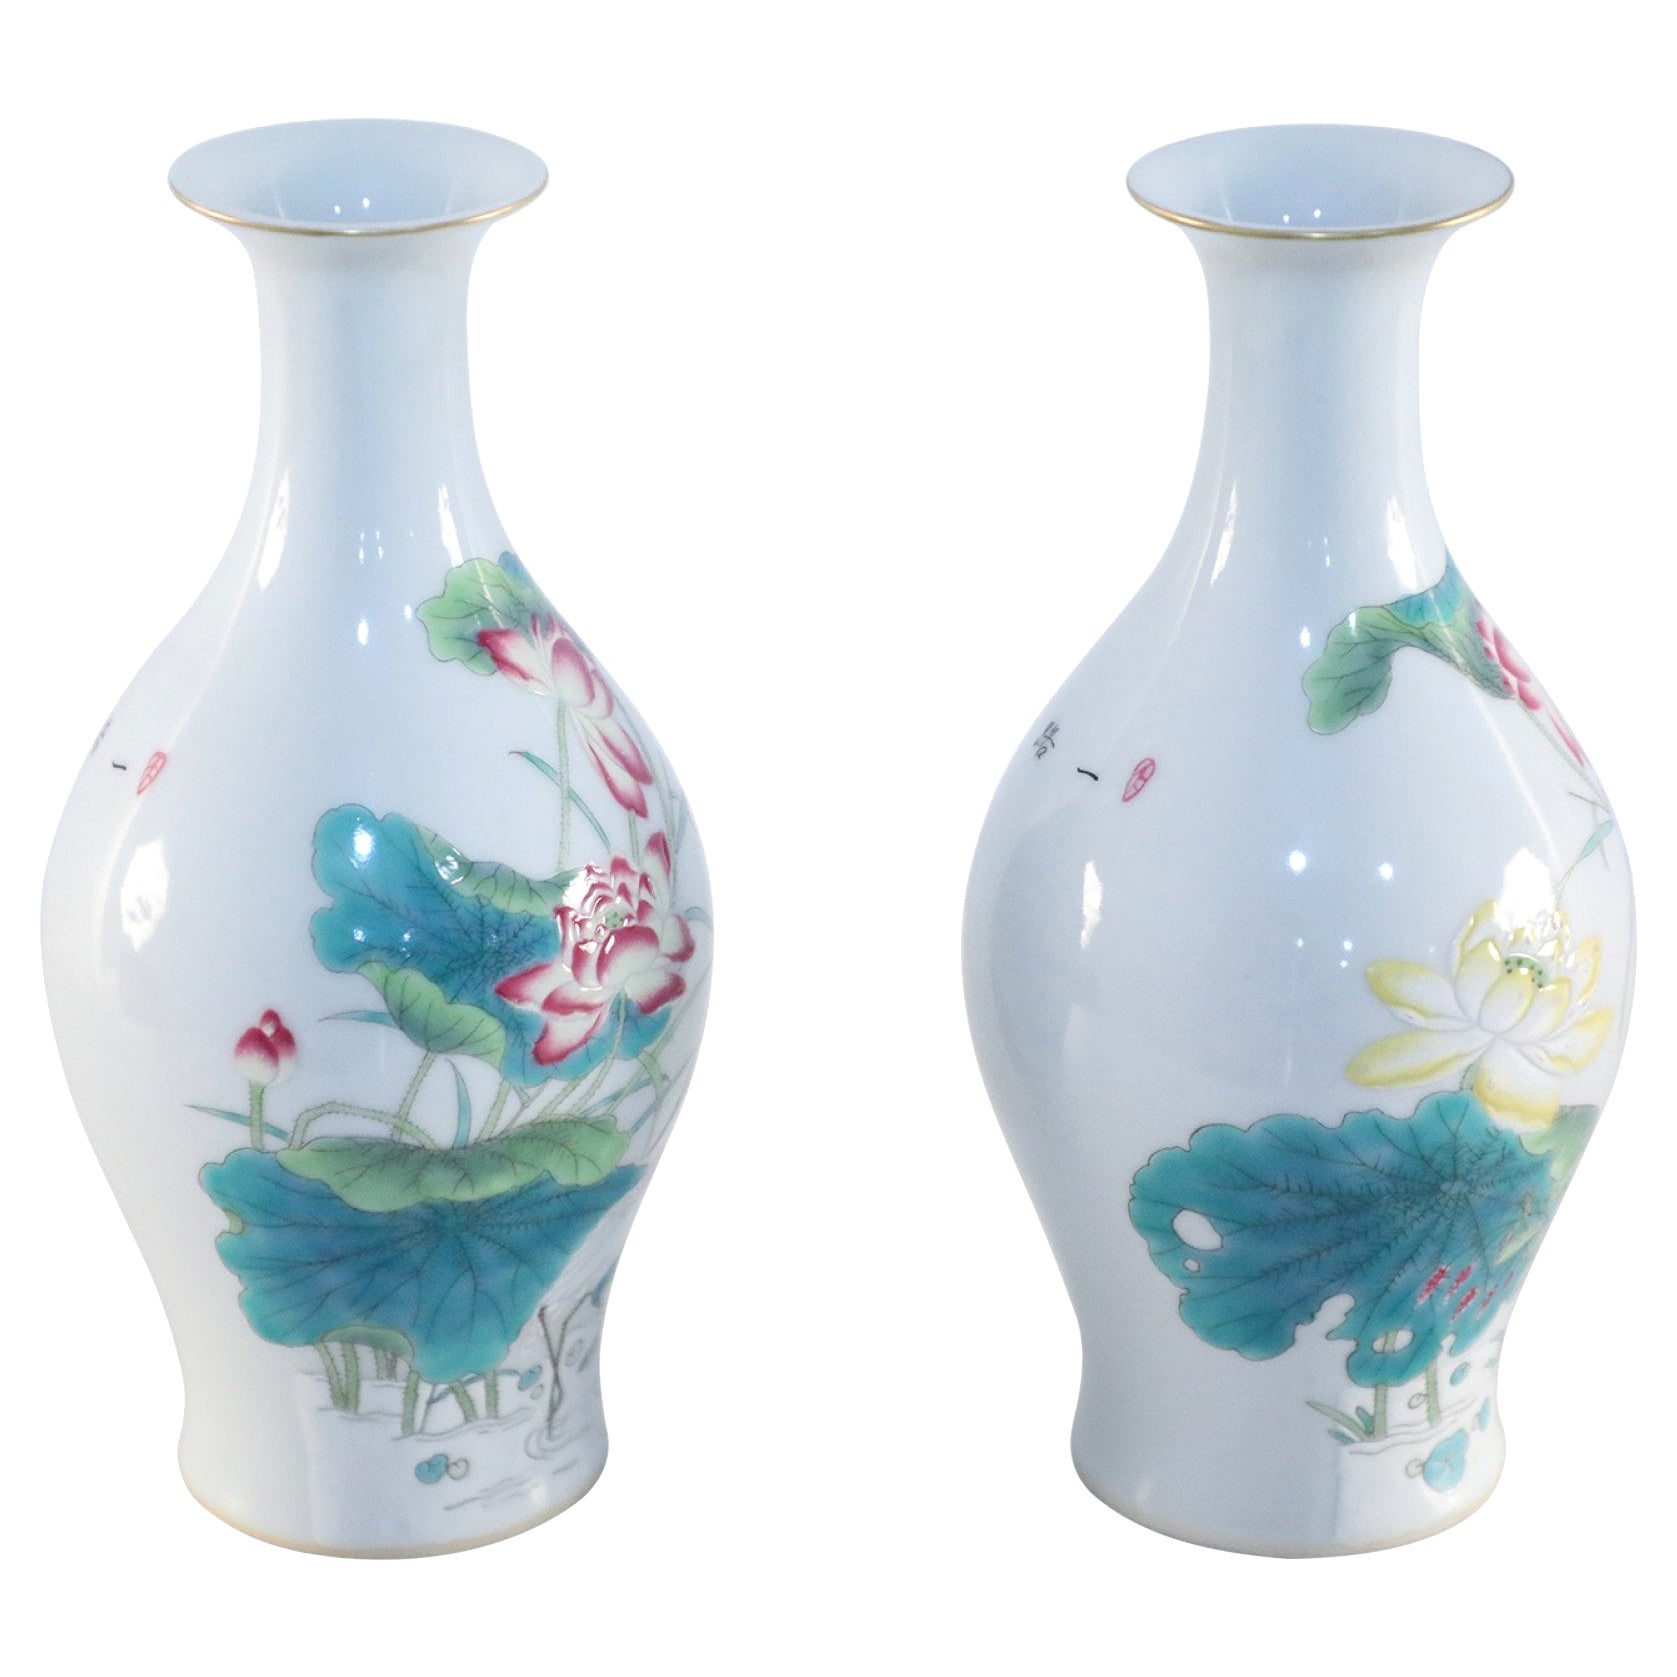 Pair of Chinese White Famille Rose Pear-Shaped Porcelain Vases